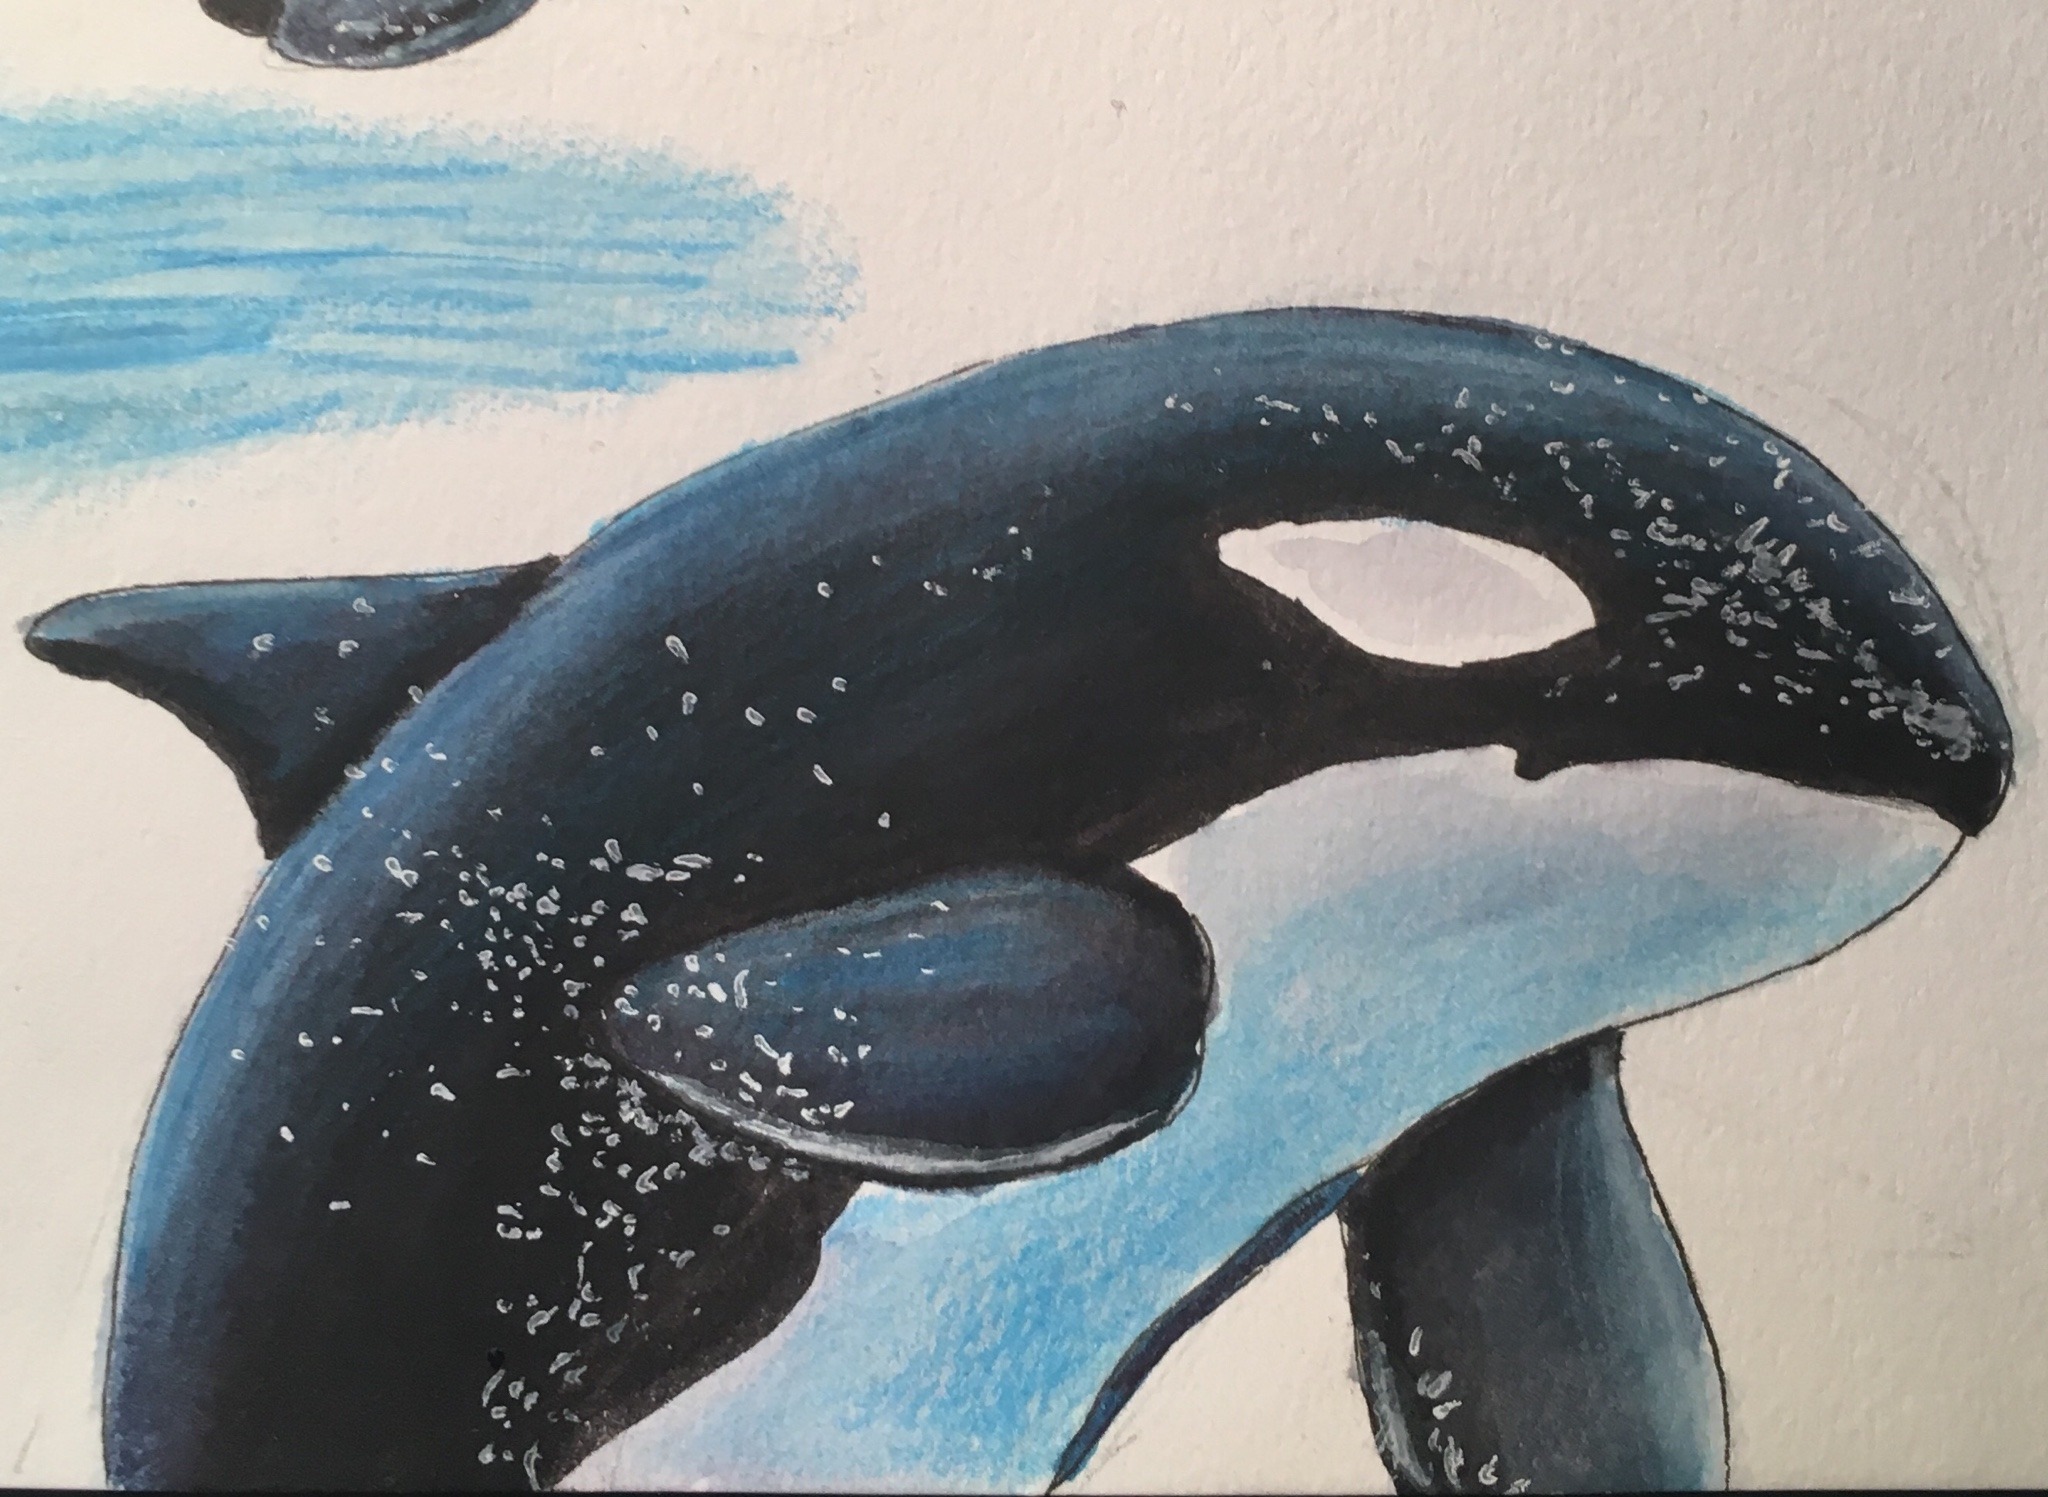 Get Back Up Again — Finished some orca drawings ️